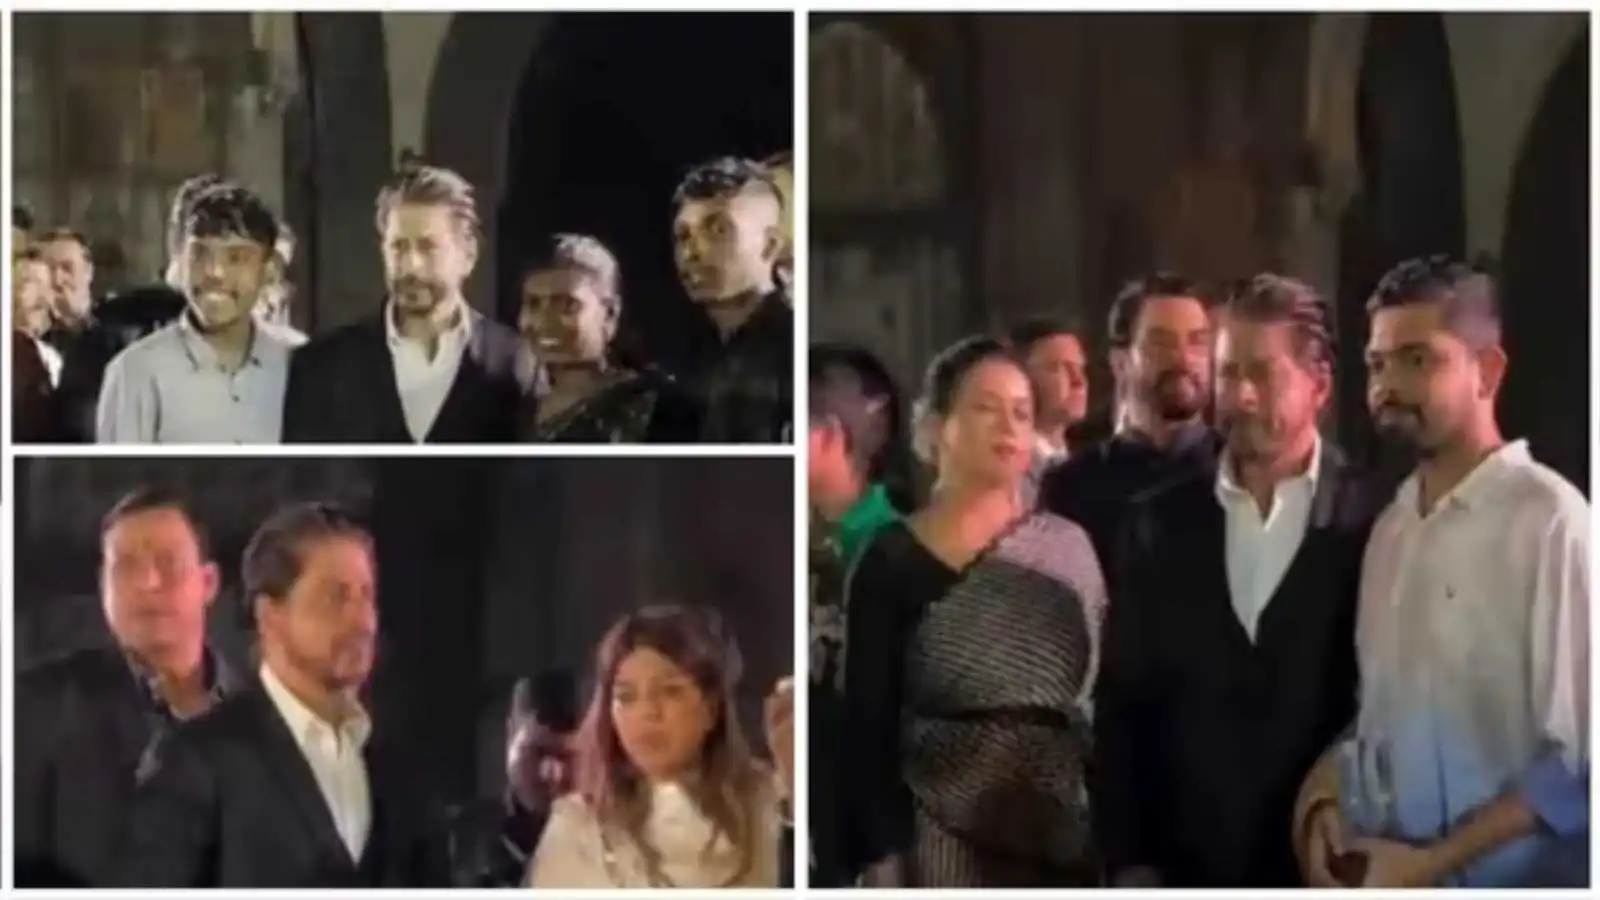 ‘Such a gentleman’ : Shah Rukh Khan meets the families of the 26/11 terror attack victims in a tribute event, watch